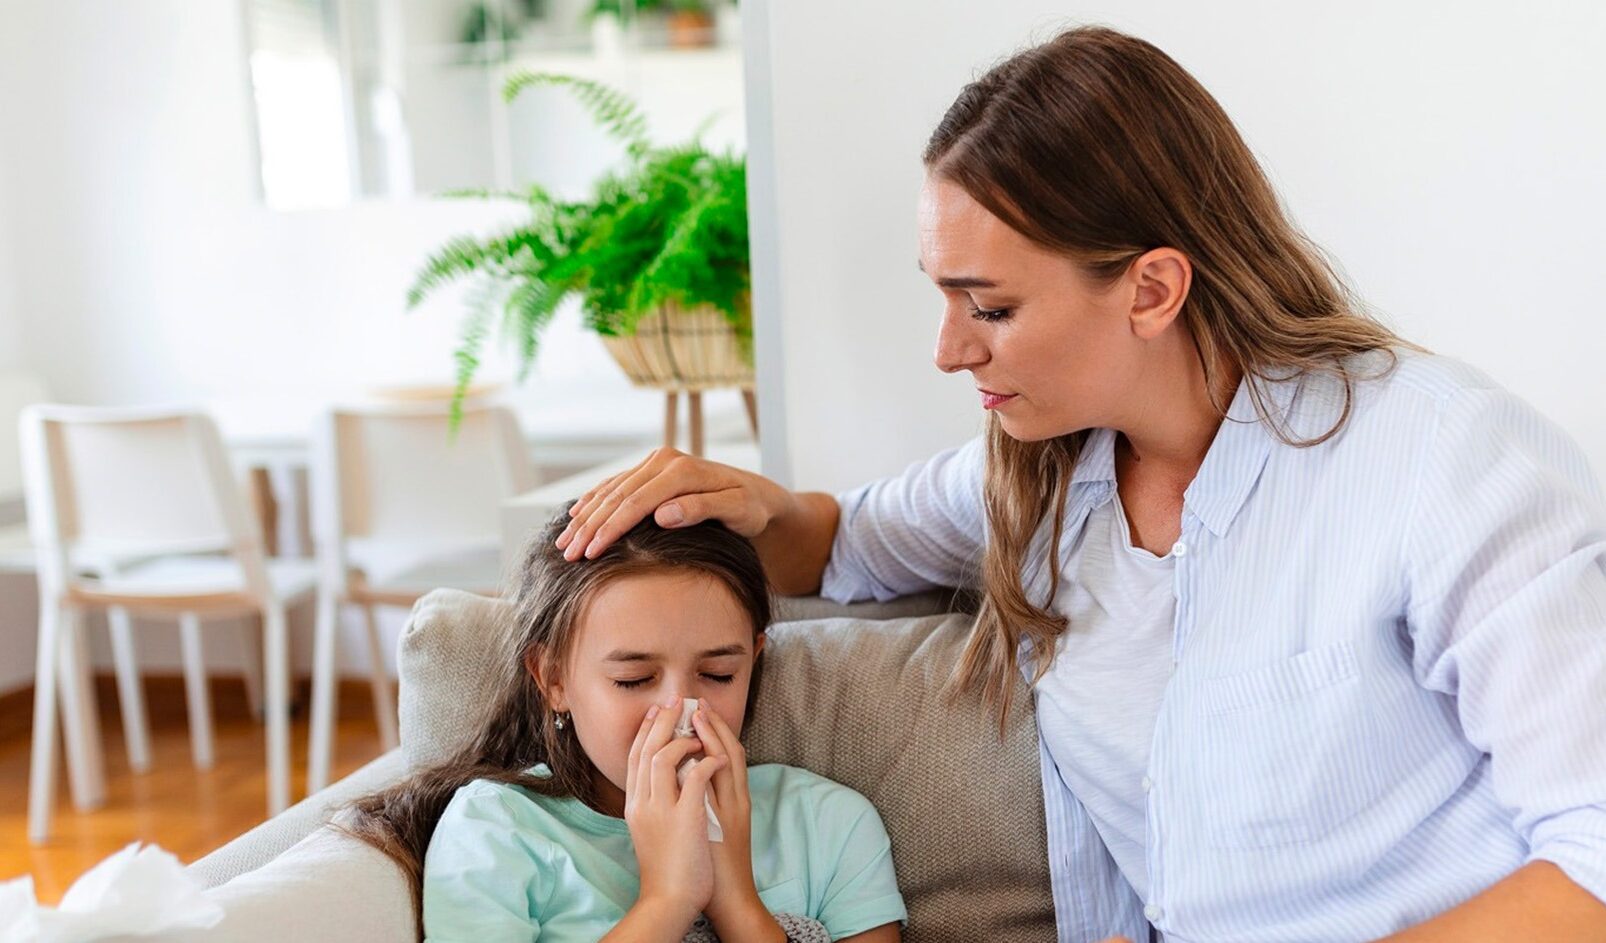 Woman comforting sick child who is blowing her nose into a tissue.